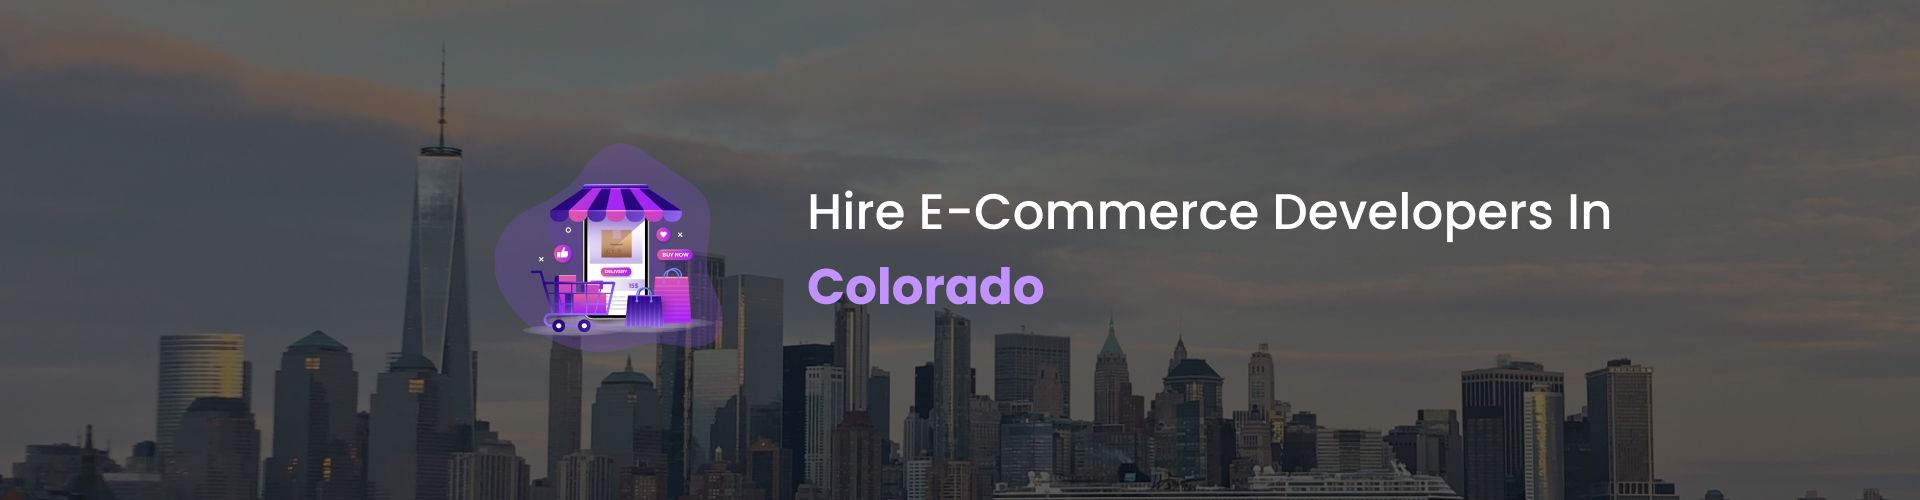 hire ecommerce developers in colorado